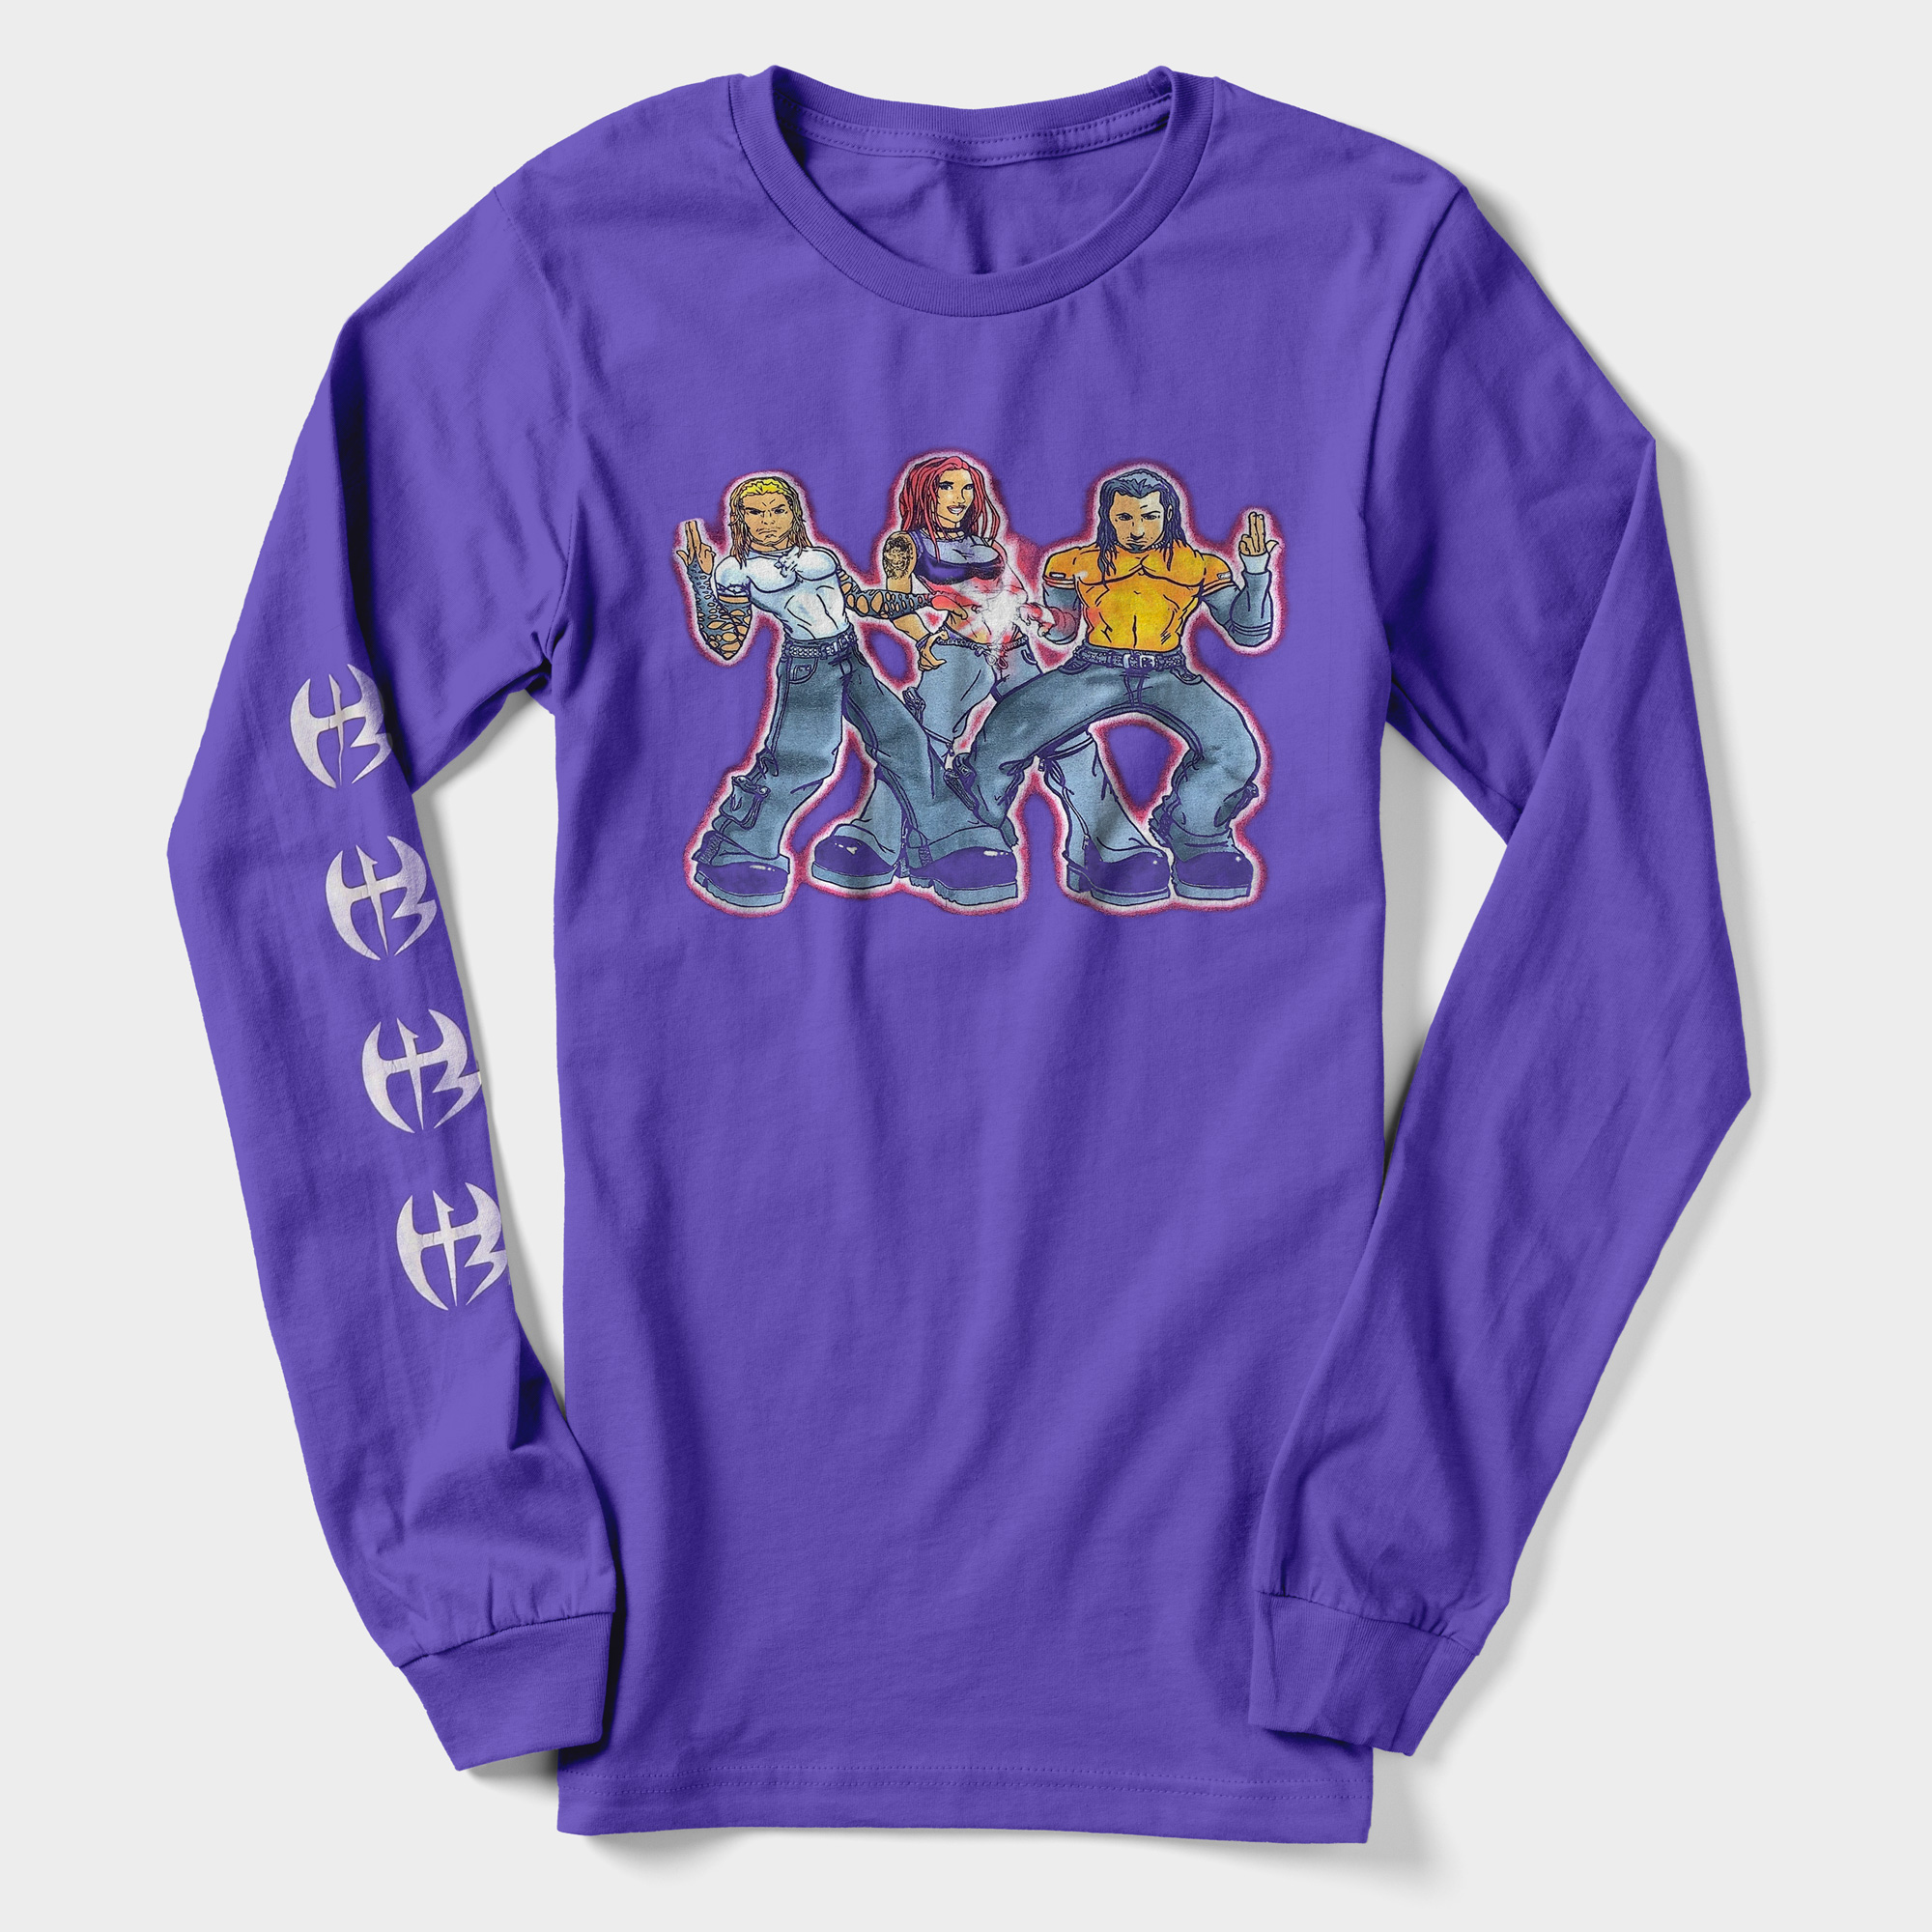 The purple long-sleeve Team Xtreme shirt features cartoon versions of Lita and The Hardy Boyz. 